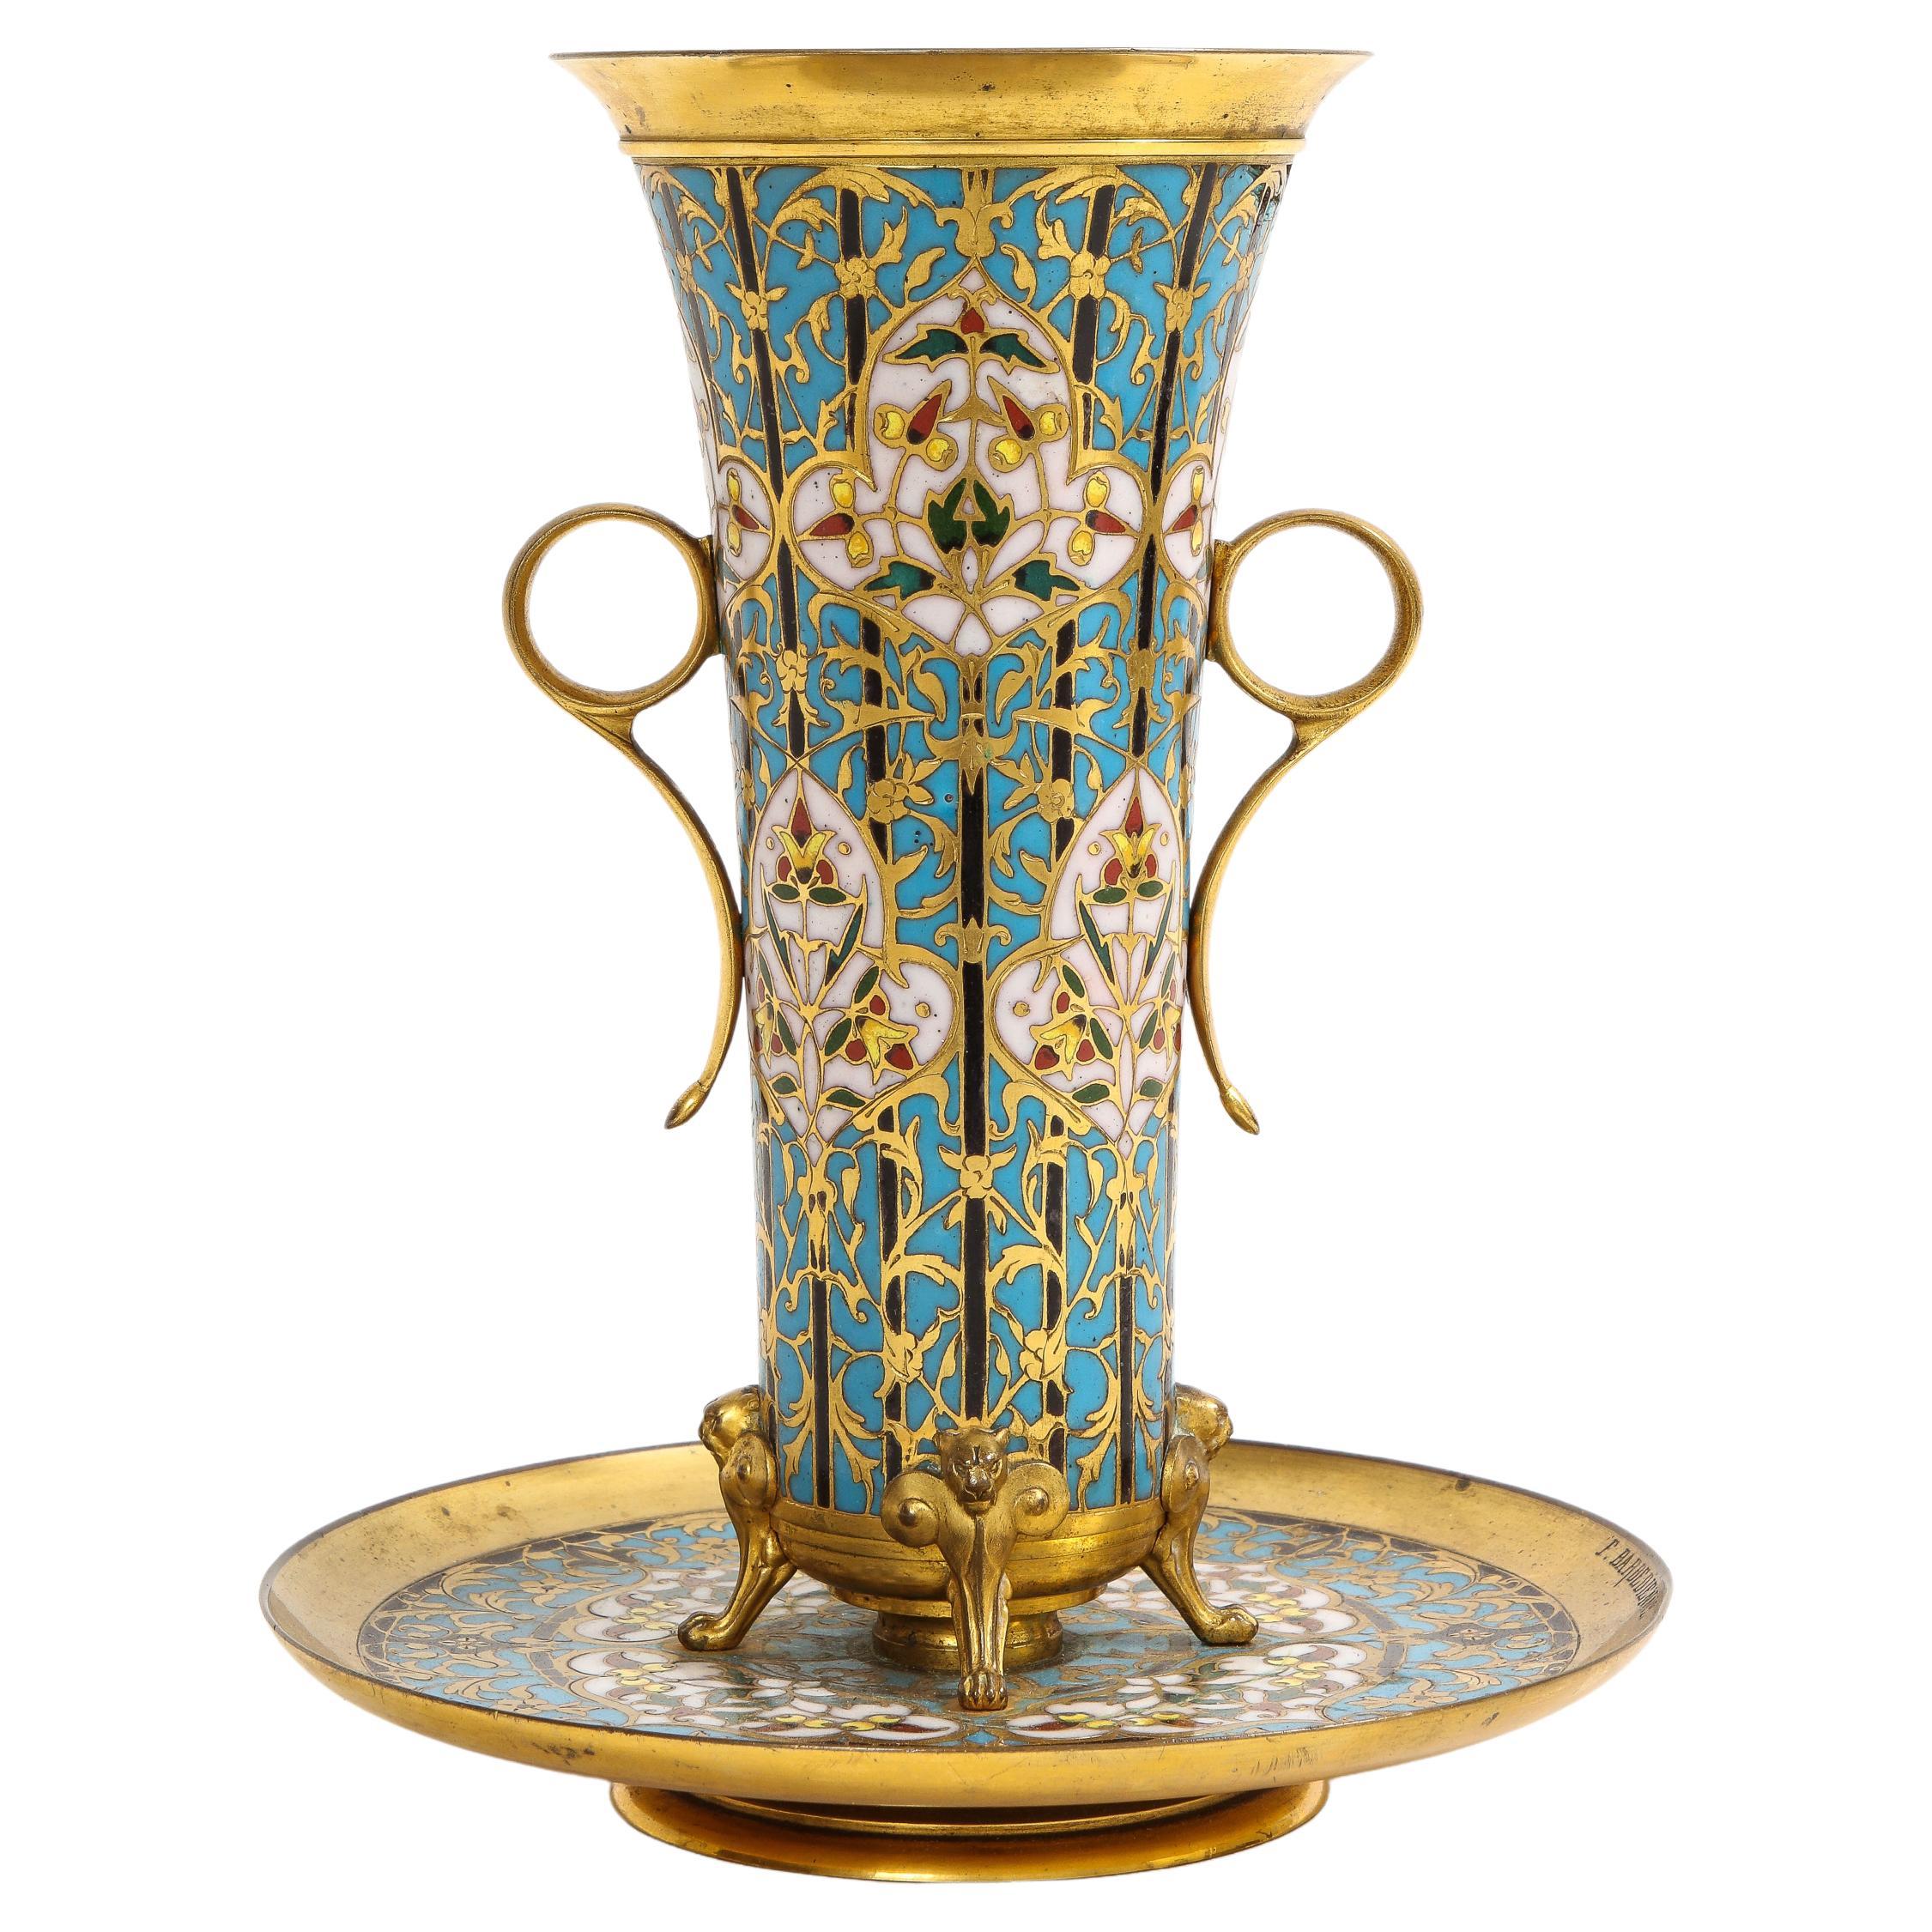 19th C. French Islamic Champleve Enamel Vase and Underplate, Signed Barbedienne